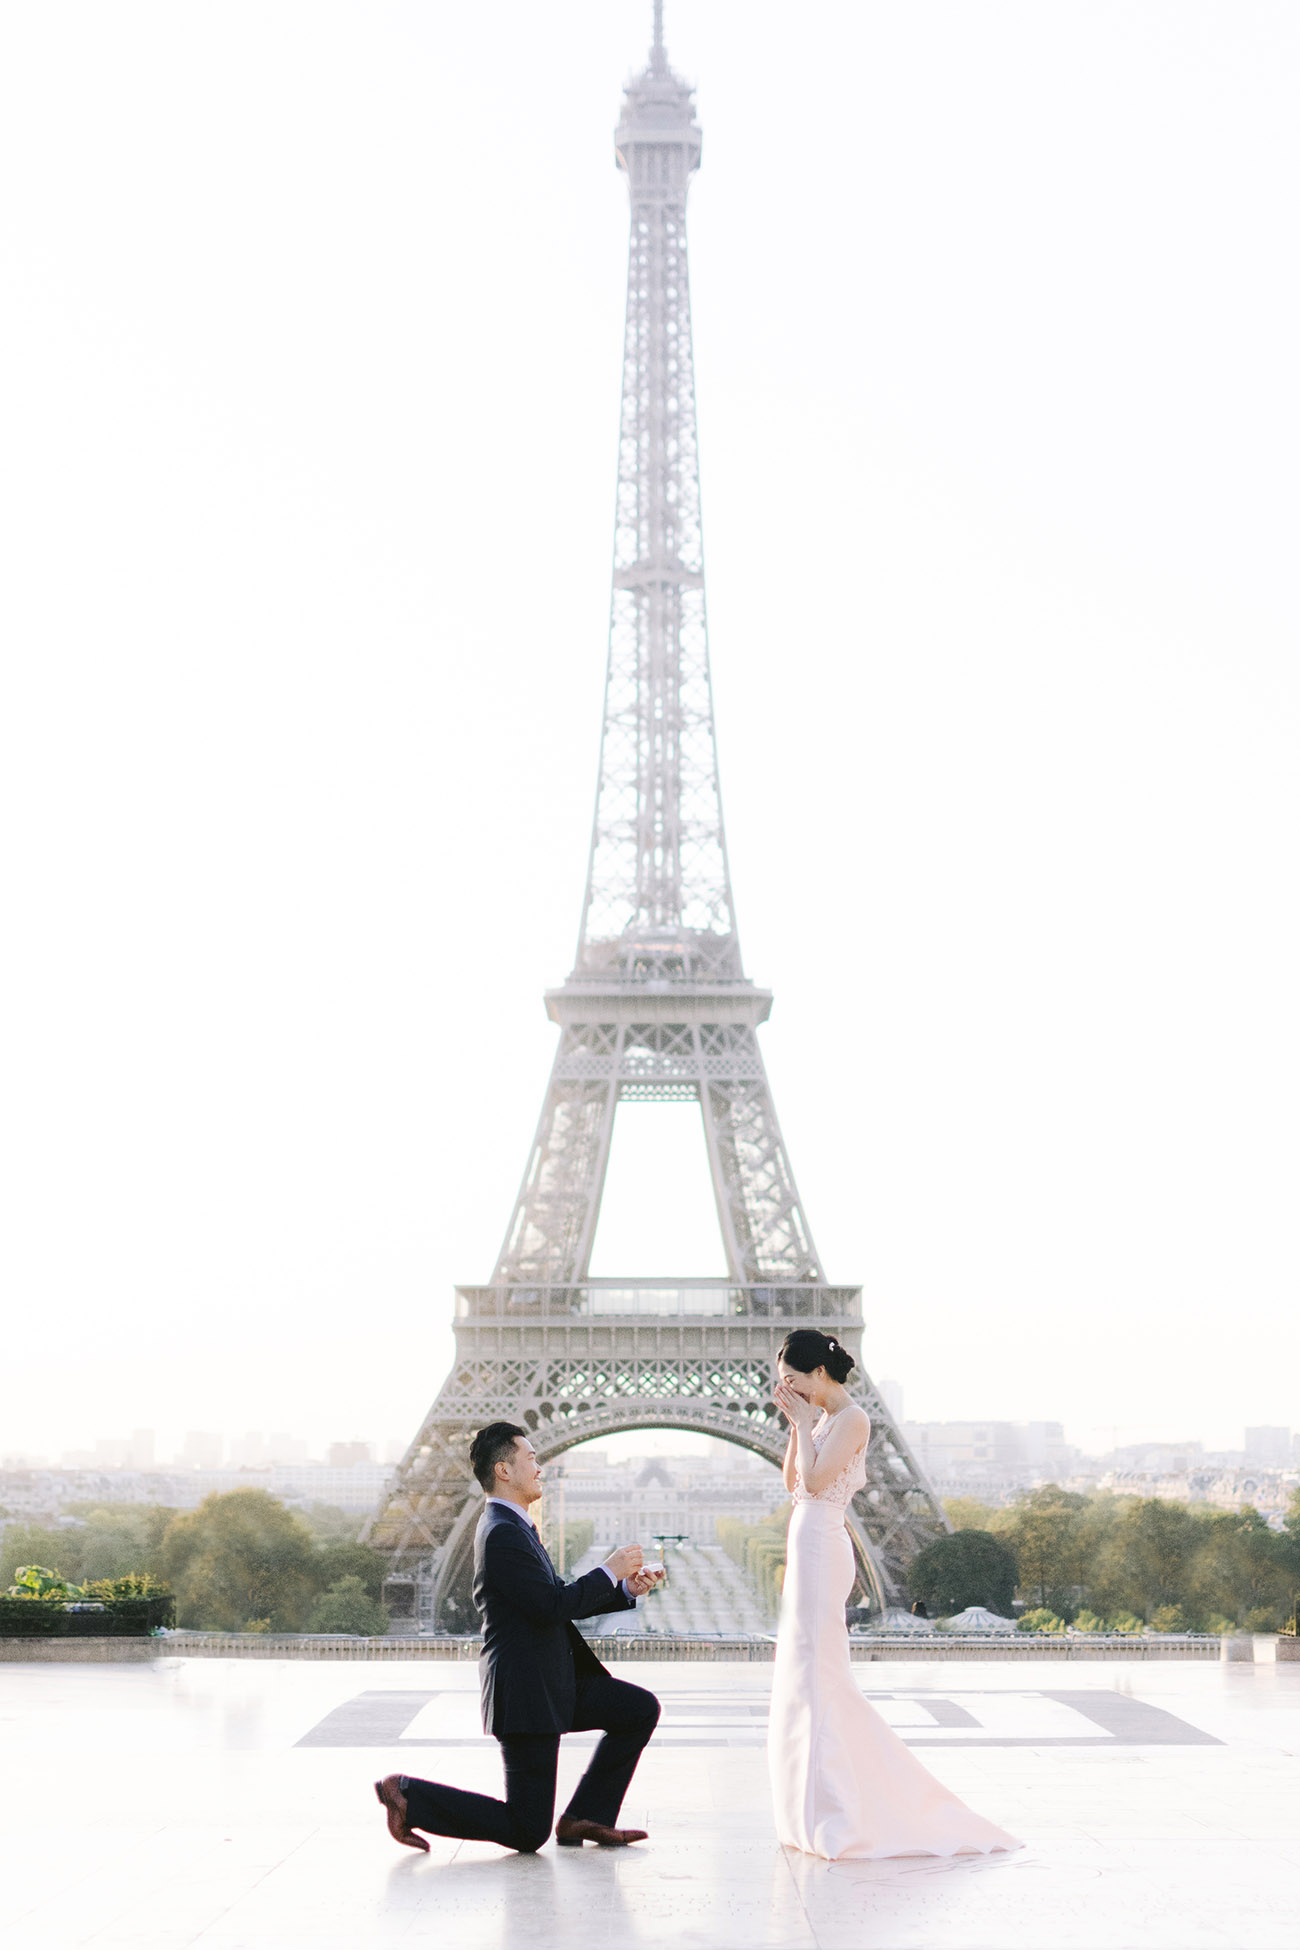 Will you marry me? Eiffel Tower proposal